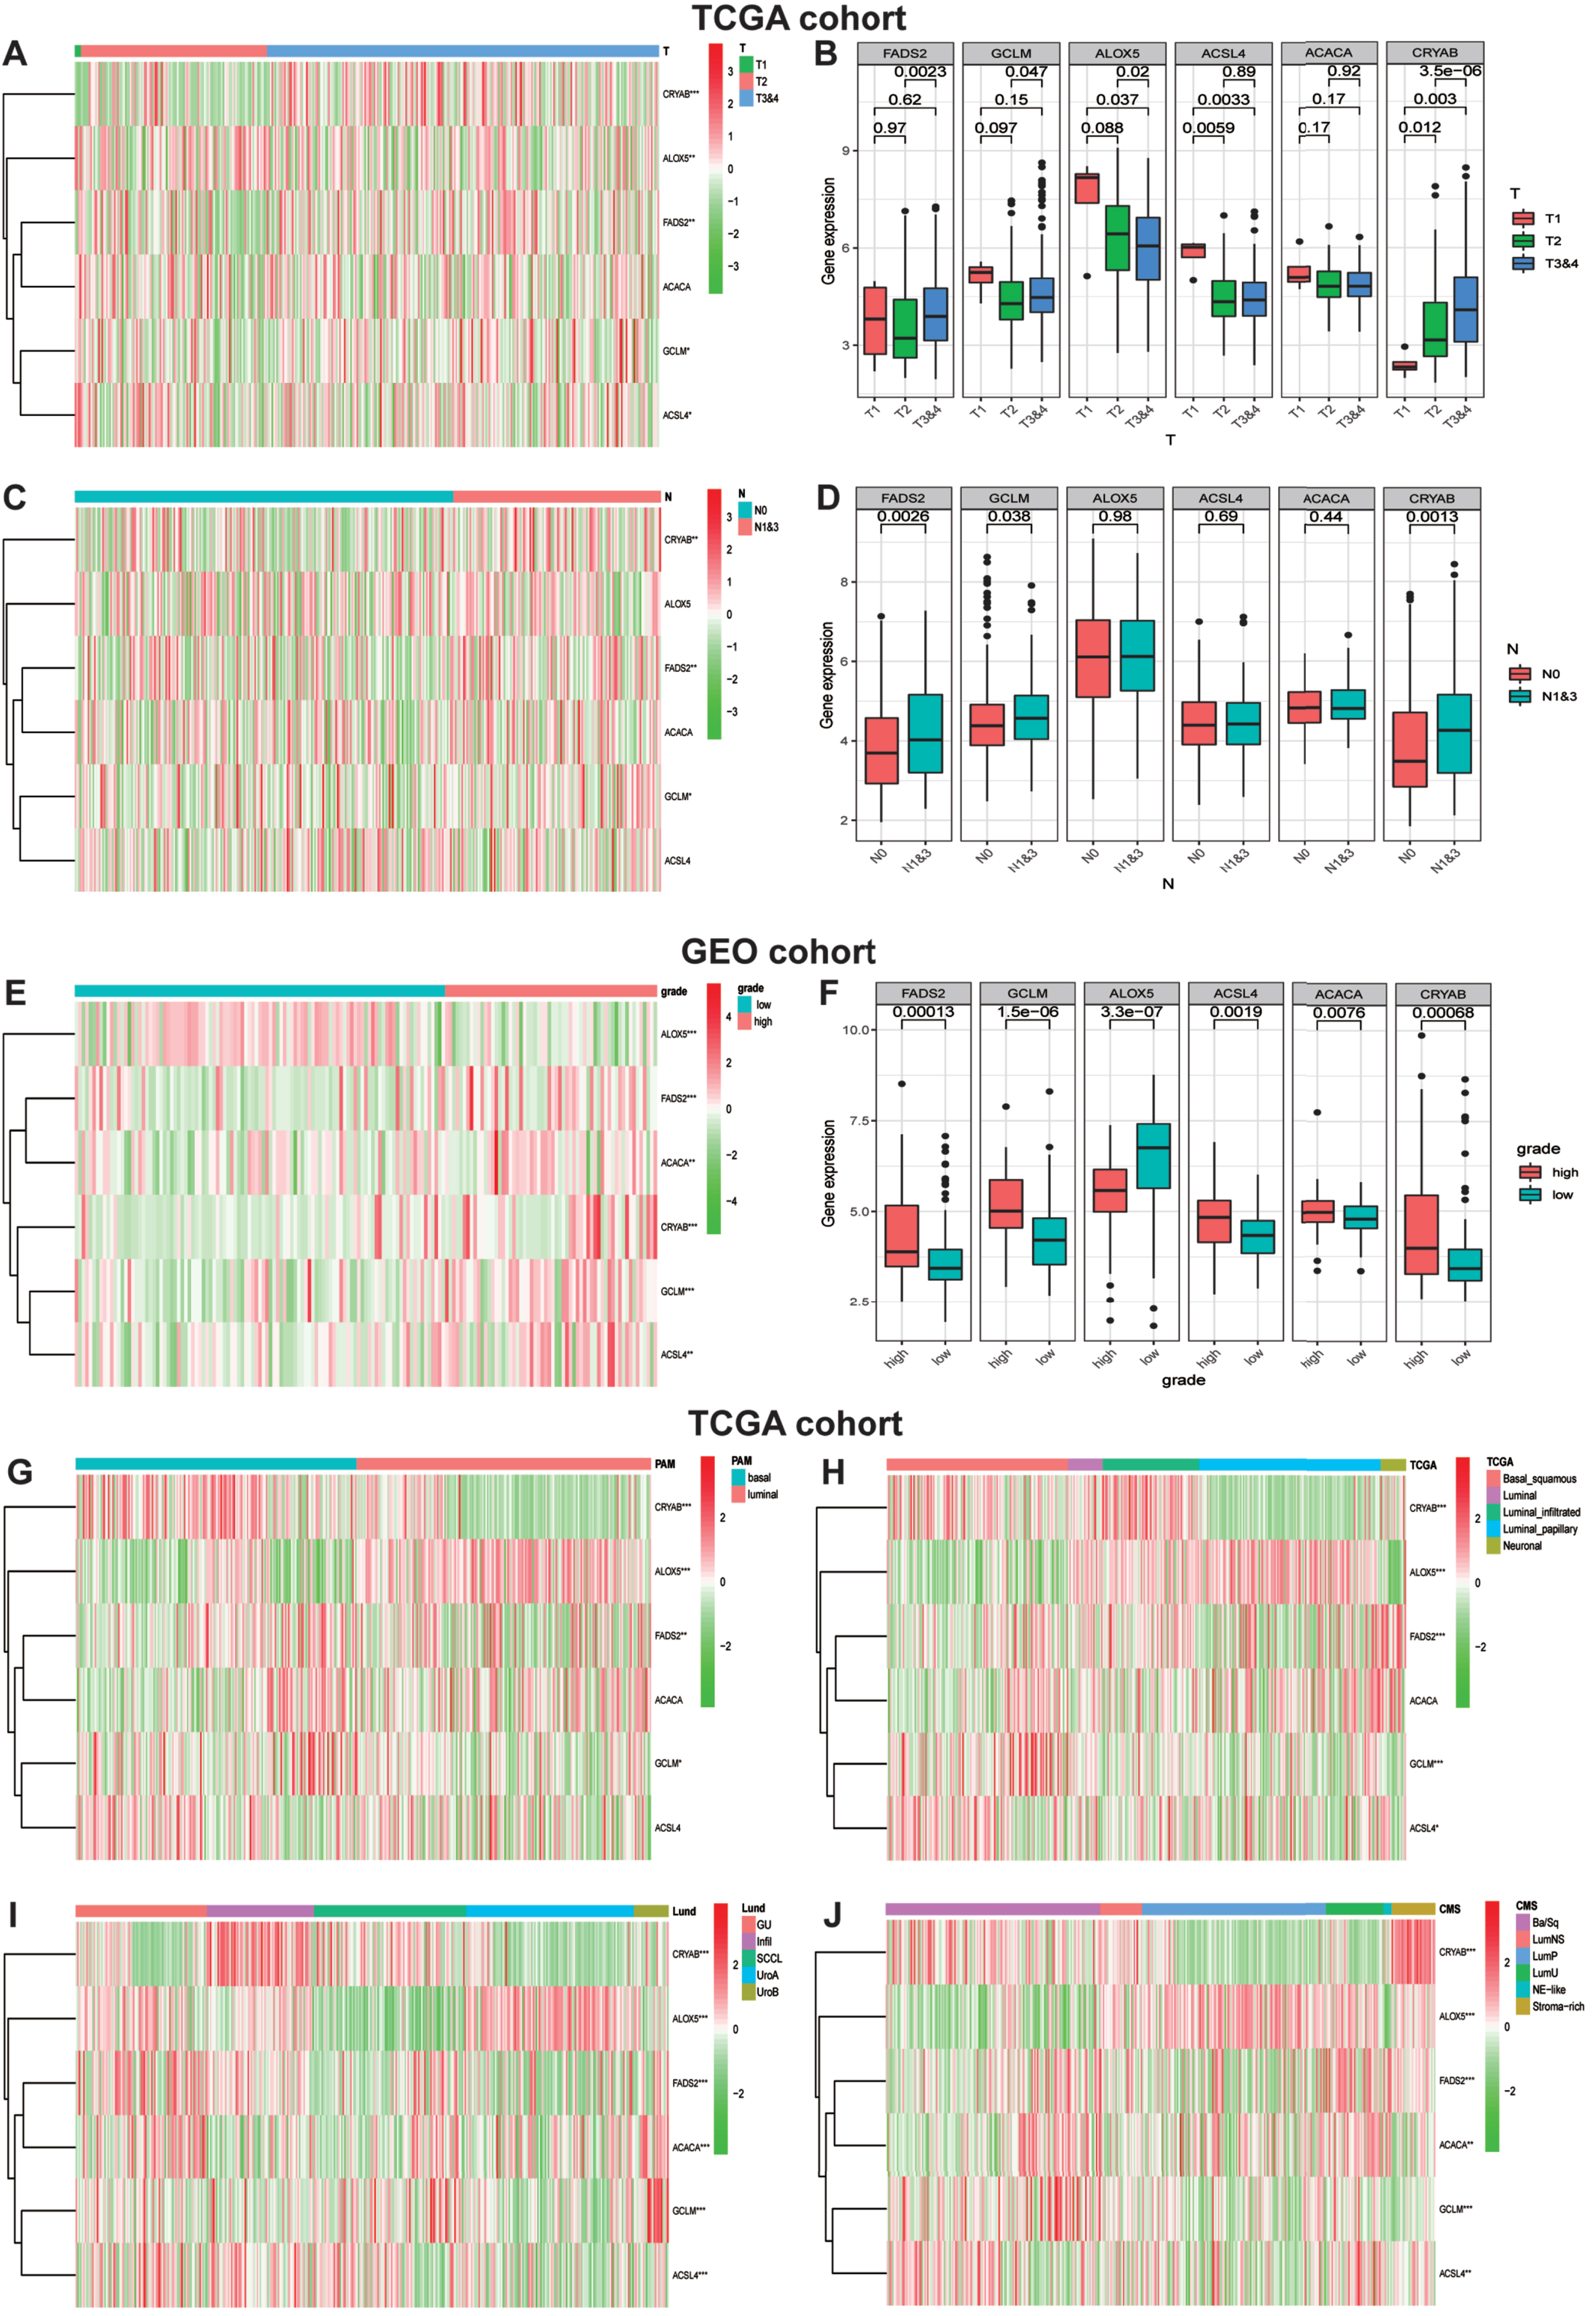 Ferroptosis-realted gene expression is correlated with clinicopathological features and molecular subclassifications of BLCA. (A)Heatmap showing six ferroptosis gene expression profiles in different T-stage from TCGA cohort. (B) The expression level of six FRGs in BLCA with different T-stage. (C) Heatmap showing six ferroptosis gene expression profiles in different N-stage from TCGA cohort. (D)The expression level of six FRGs in BLCA with different N-stage. (E) Heatmap showing six ferroptosis gene expression profiles in different WHO grade from GEO cohort. (F) The expression level of six FRGs in BLCA with different WHO grade. (G-J) Heatmap showing six ferroptosis gene expression profiles in different molecular subclassifications in TCGA cohort. *P < 0.05,**P < 0.01,and ***P < 0.001